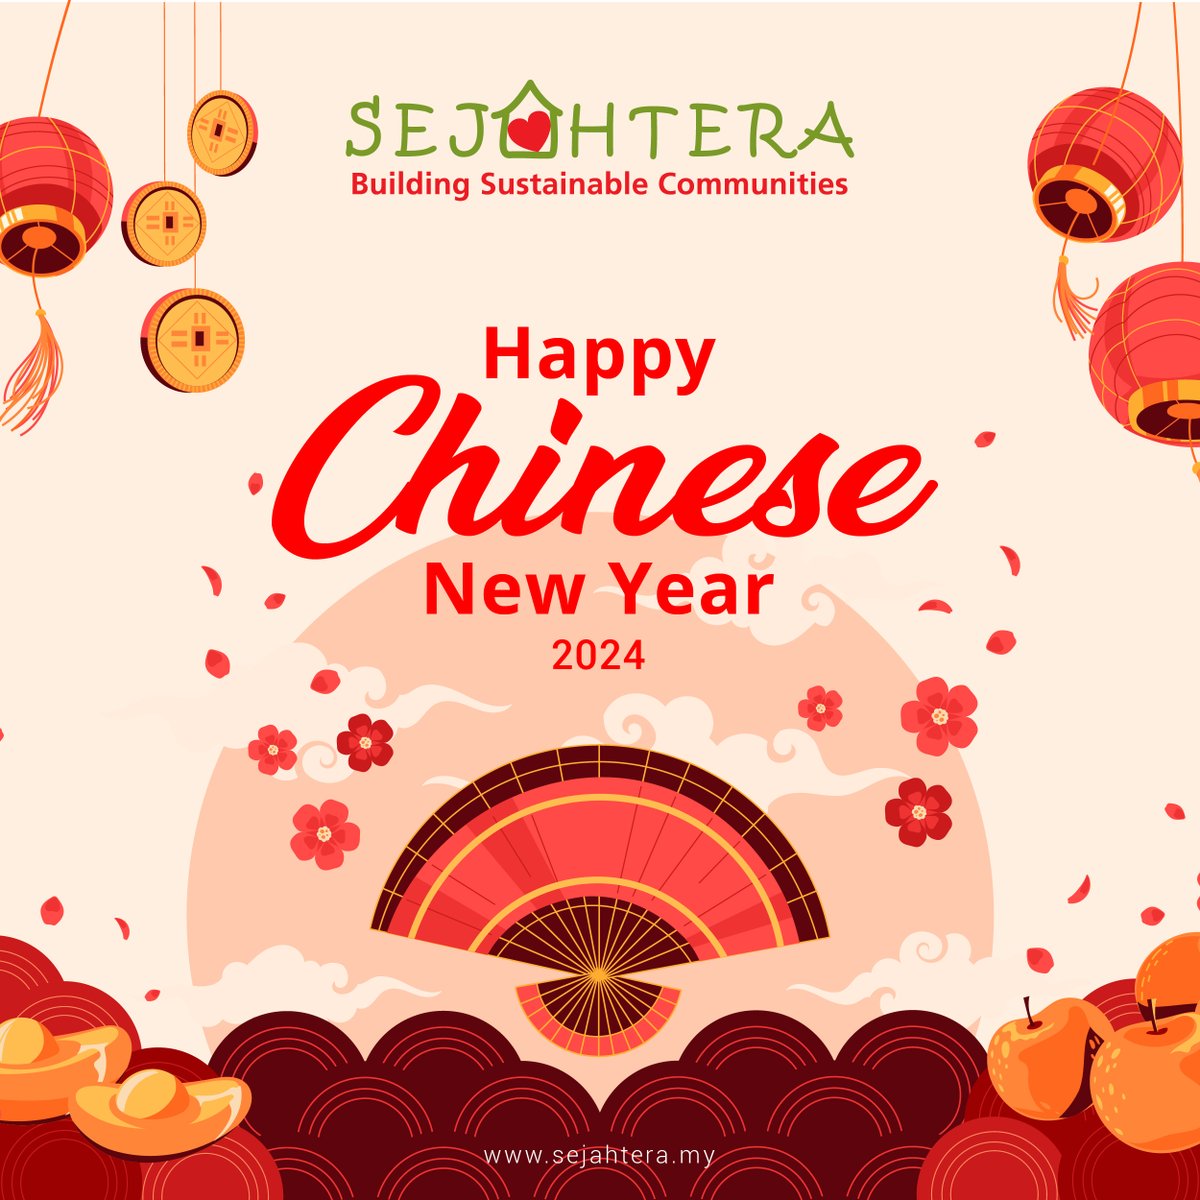 Happy Chinese New Year!

Yayasan Sejahtera wishes you a joyous and prosperous Chinese New Year. Embrace the spirit of giving and unity as we celebrate the Year of the Dragon.

#ChineseNewYear #EndPovertyTogether #YayasanSejahtera #DonateForChange